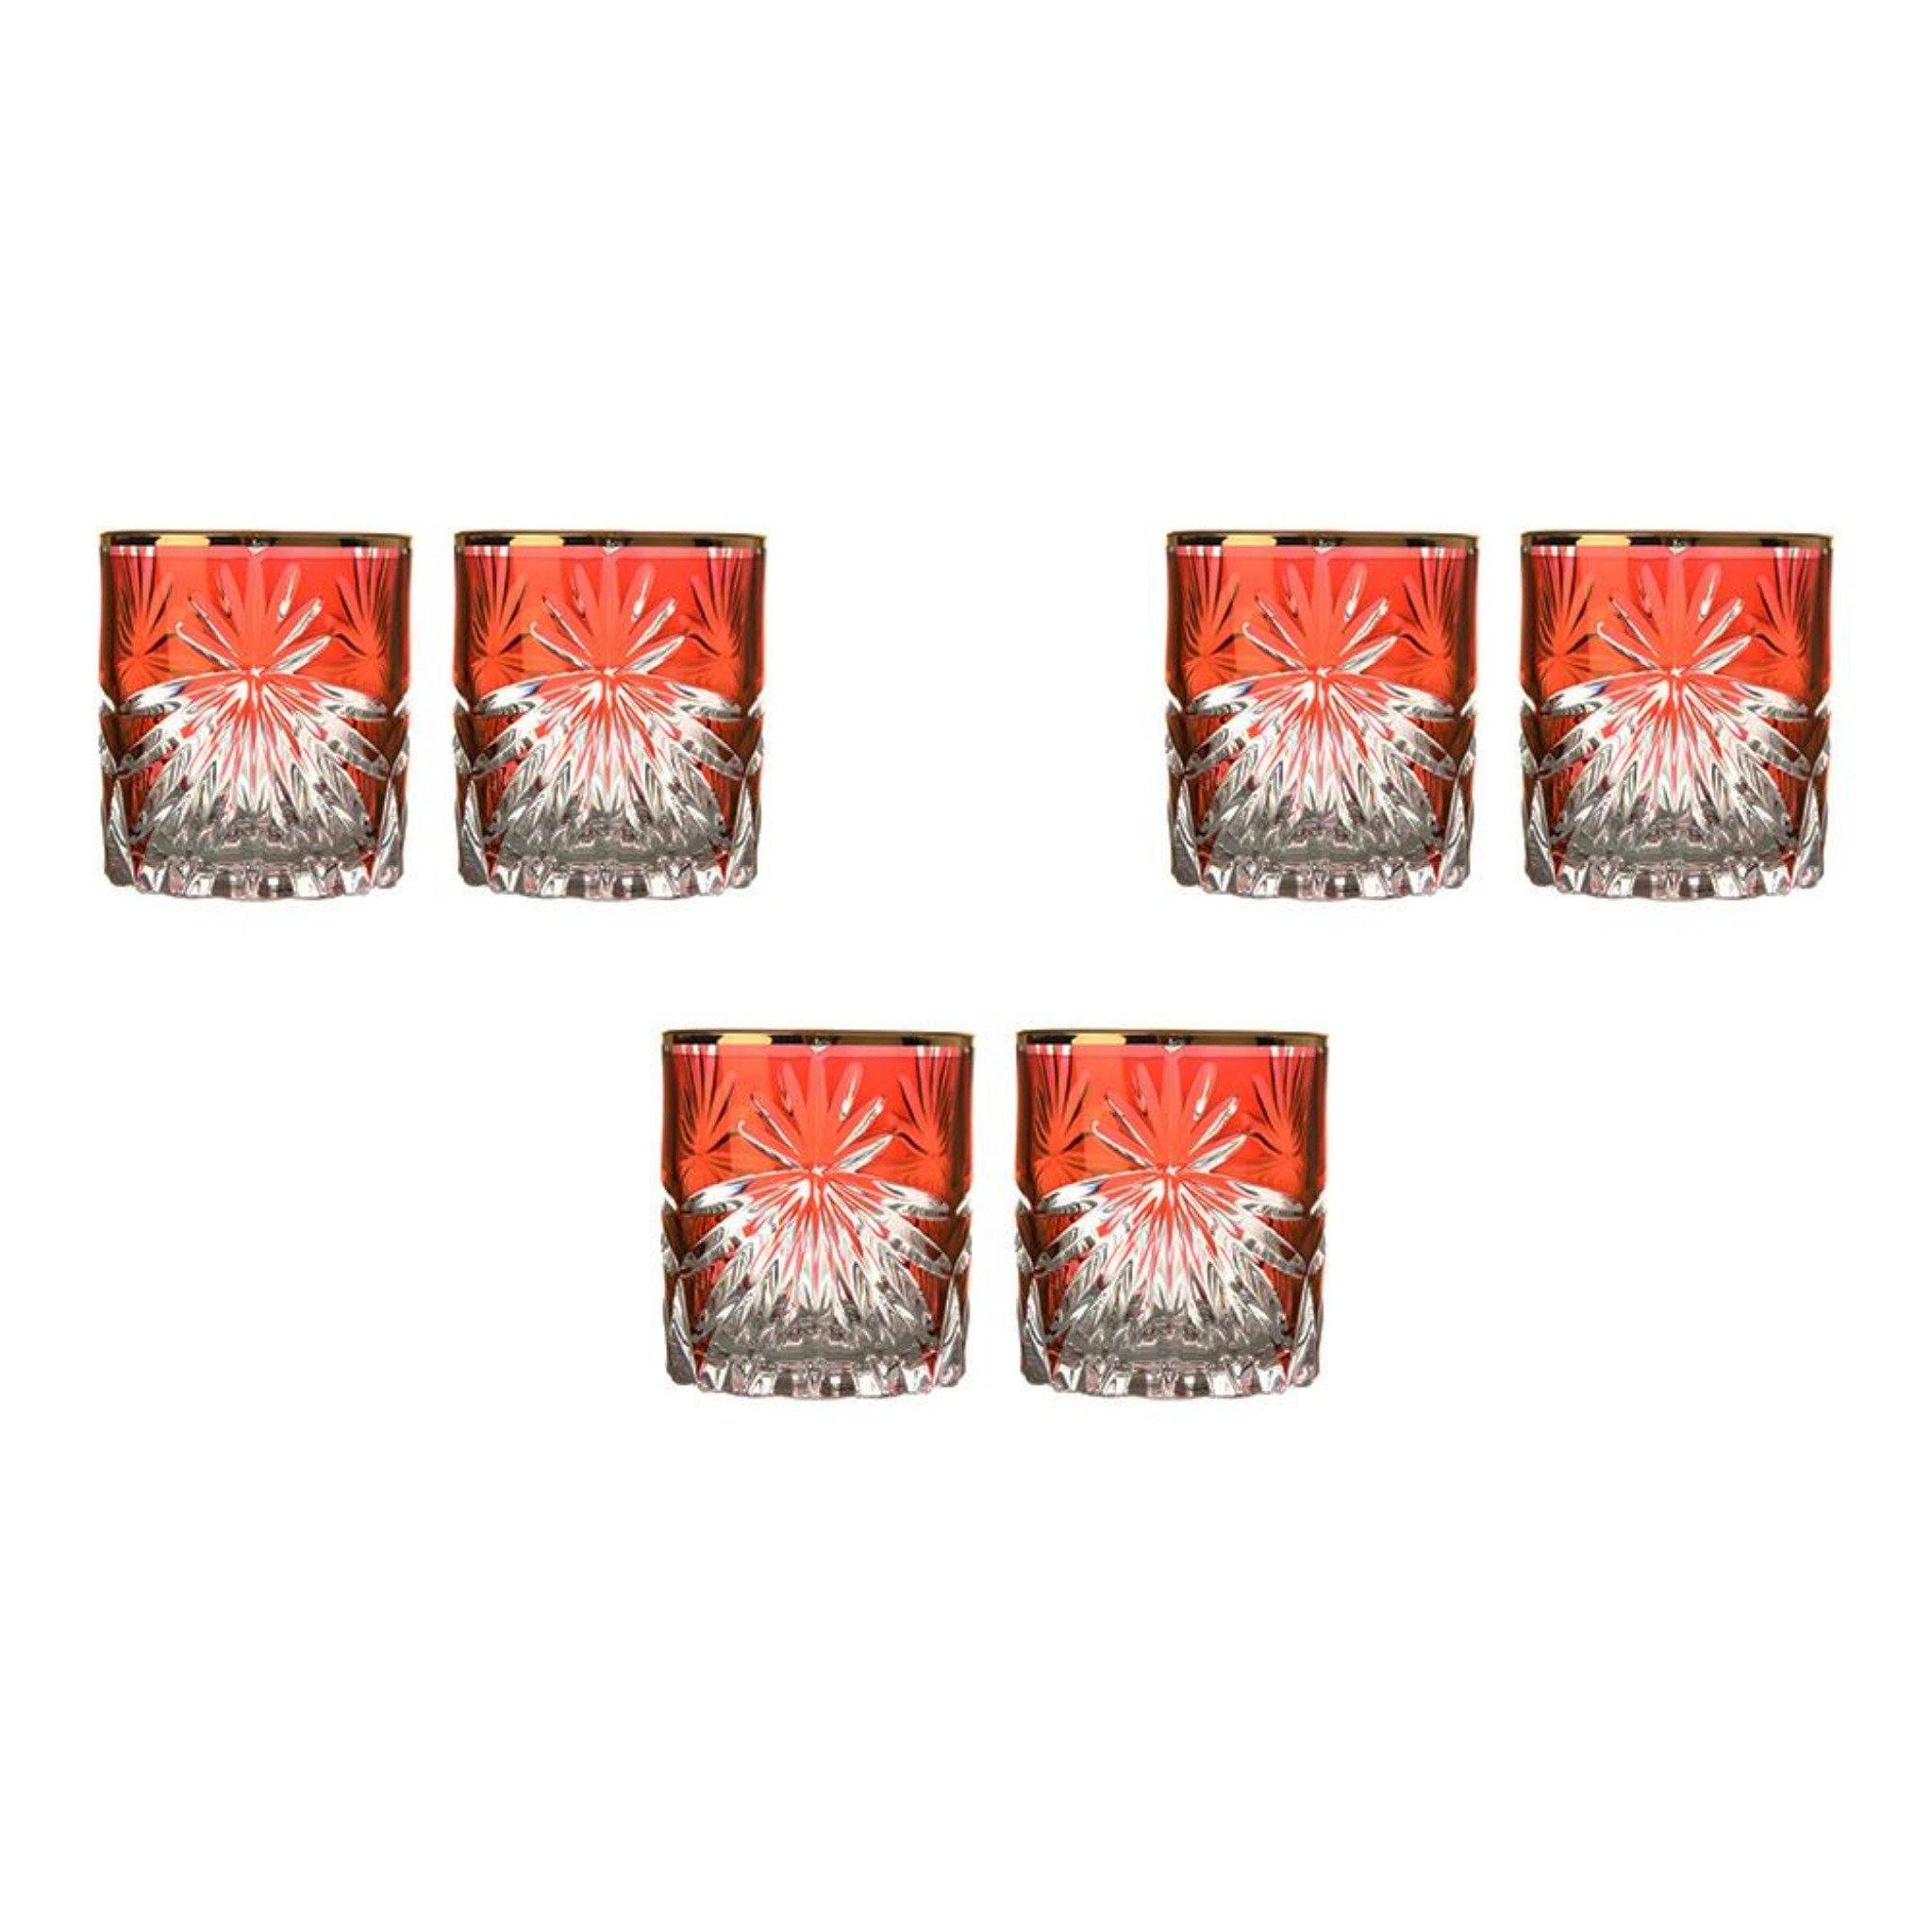 RCR Italy - Tumbler Glass Set 6 Pieces - Red & Gold - 310ml - 380003090